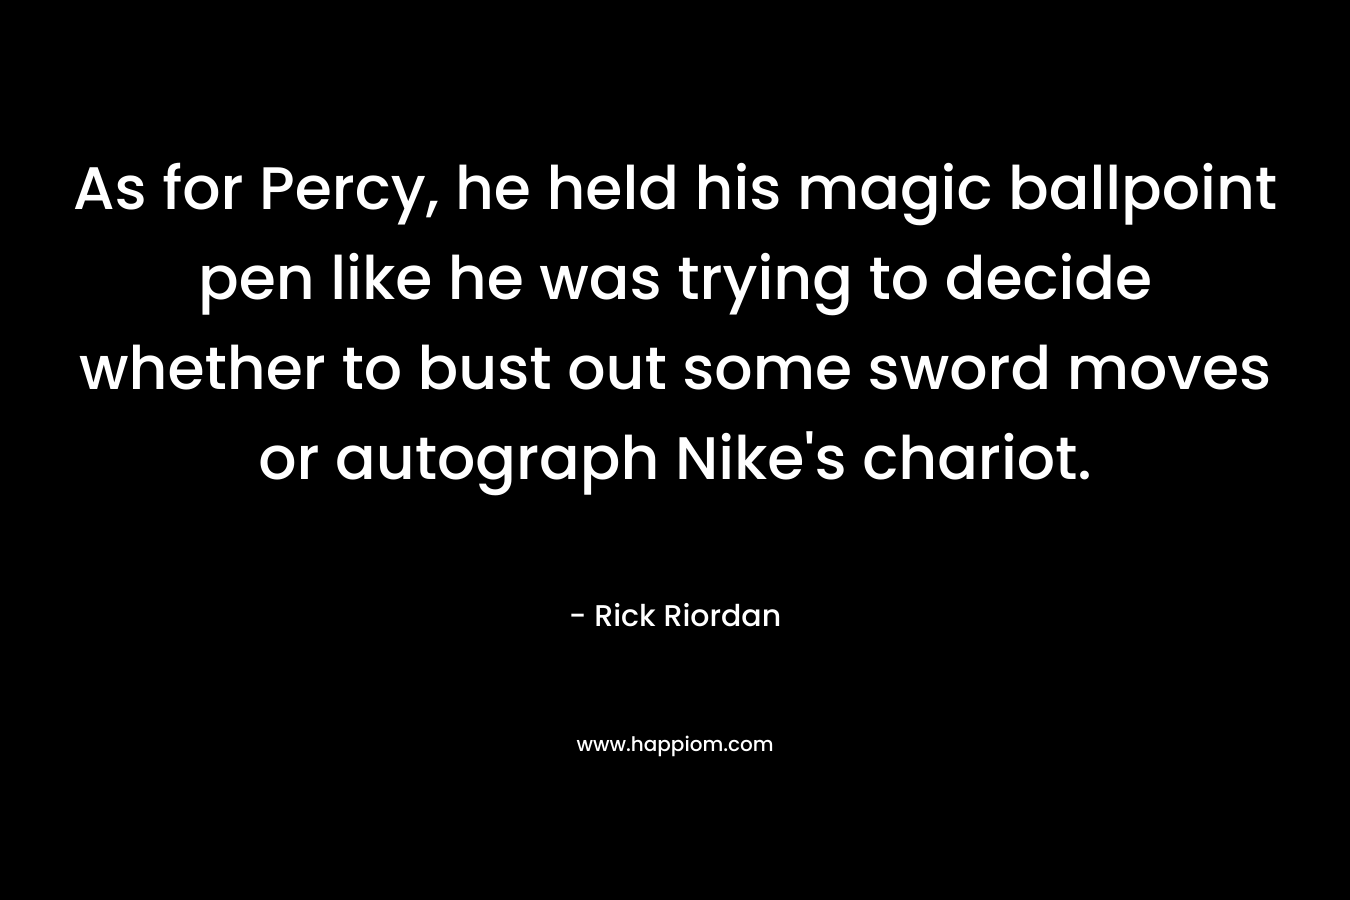 As for Percy, he held his magic ballpoint pen like he was trying to decide whether to bust out some sword moves or autograph Nike's chariot.